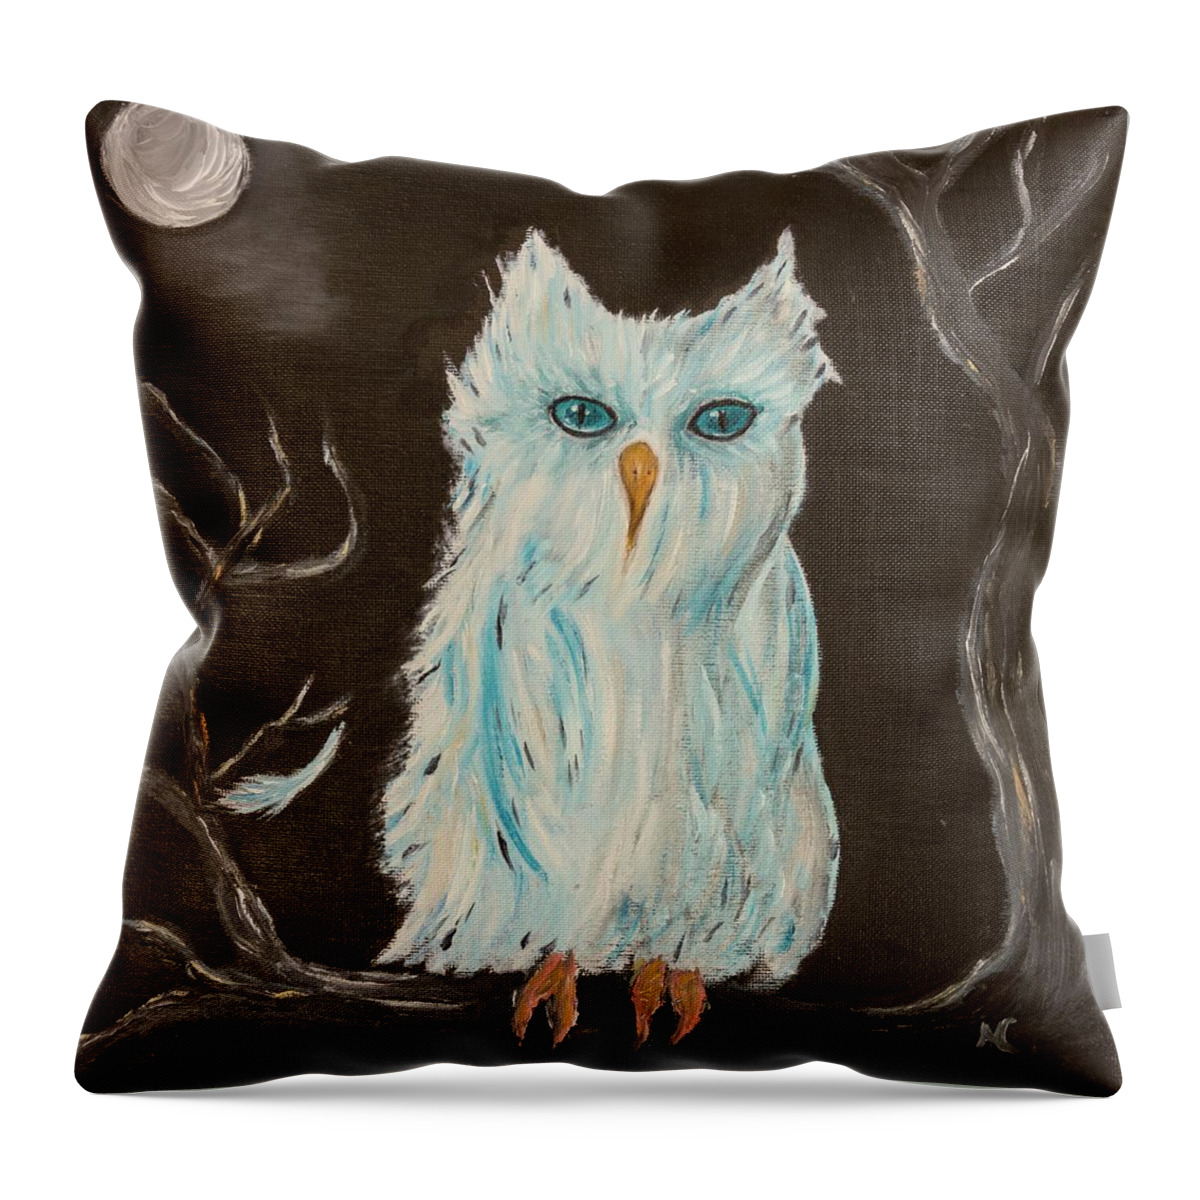 Owl Throw Pillow featuring the painting Quiet Night by Neslihan Ergul Colley